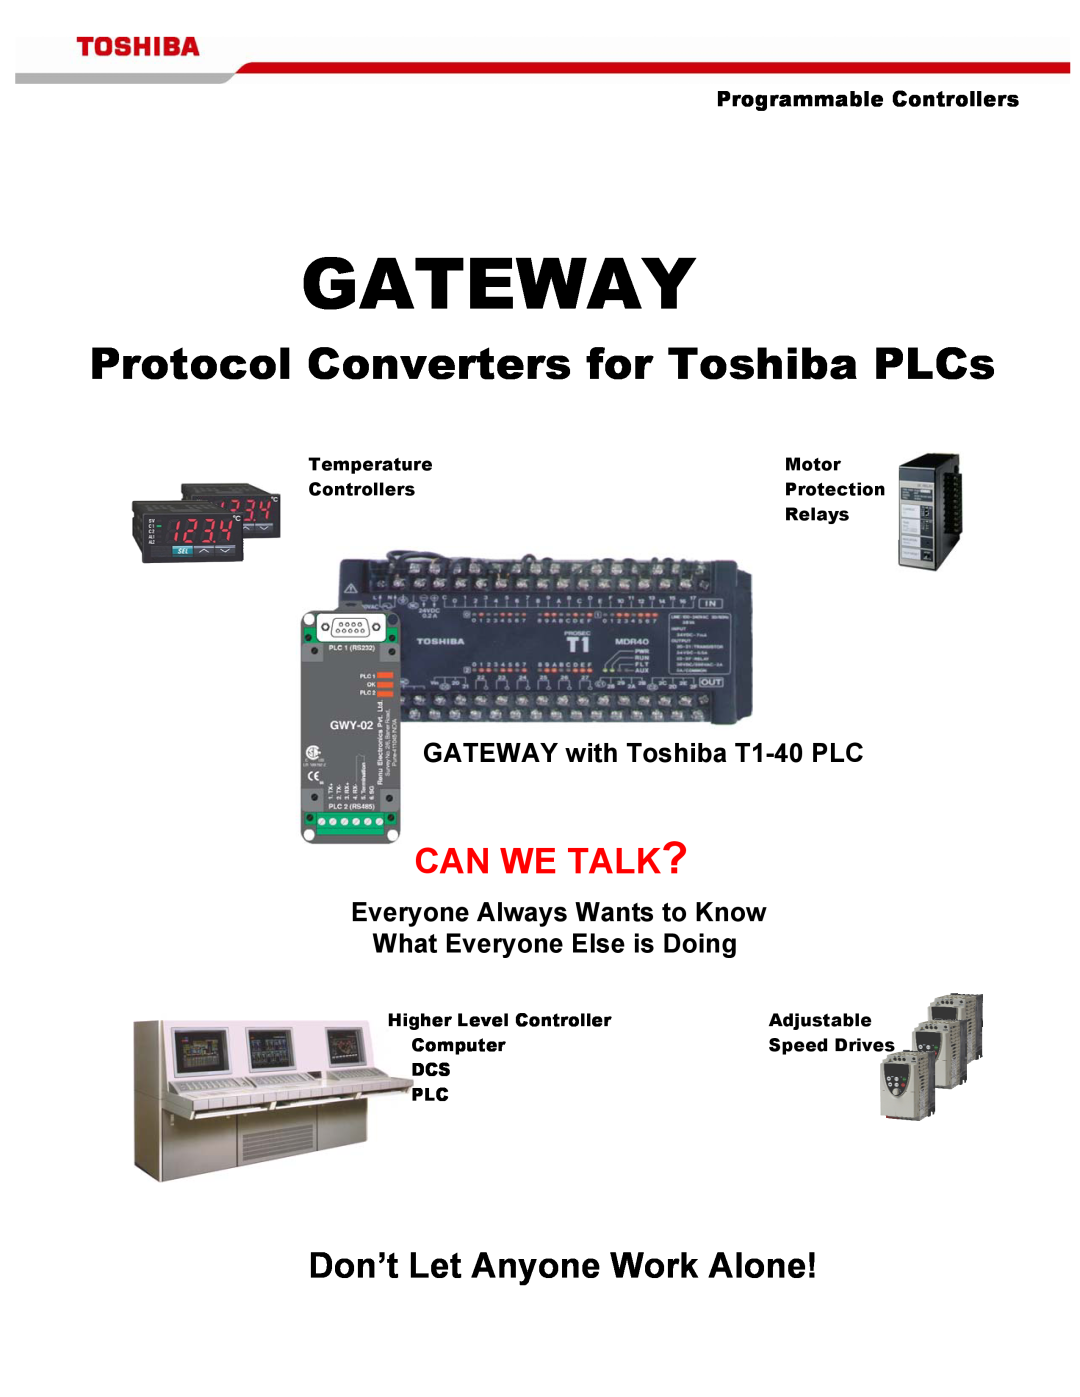 Toshiba manual GATEWAY with Toshiba T1-40 PLC, Everyone Always Wants to Know What Everyone Else is Doing, Gateway 